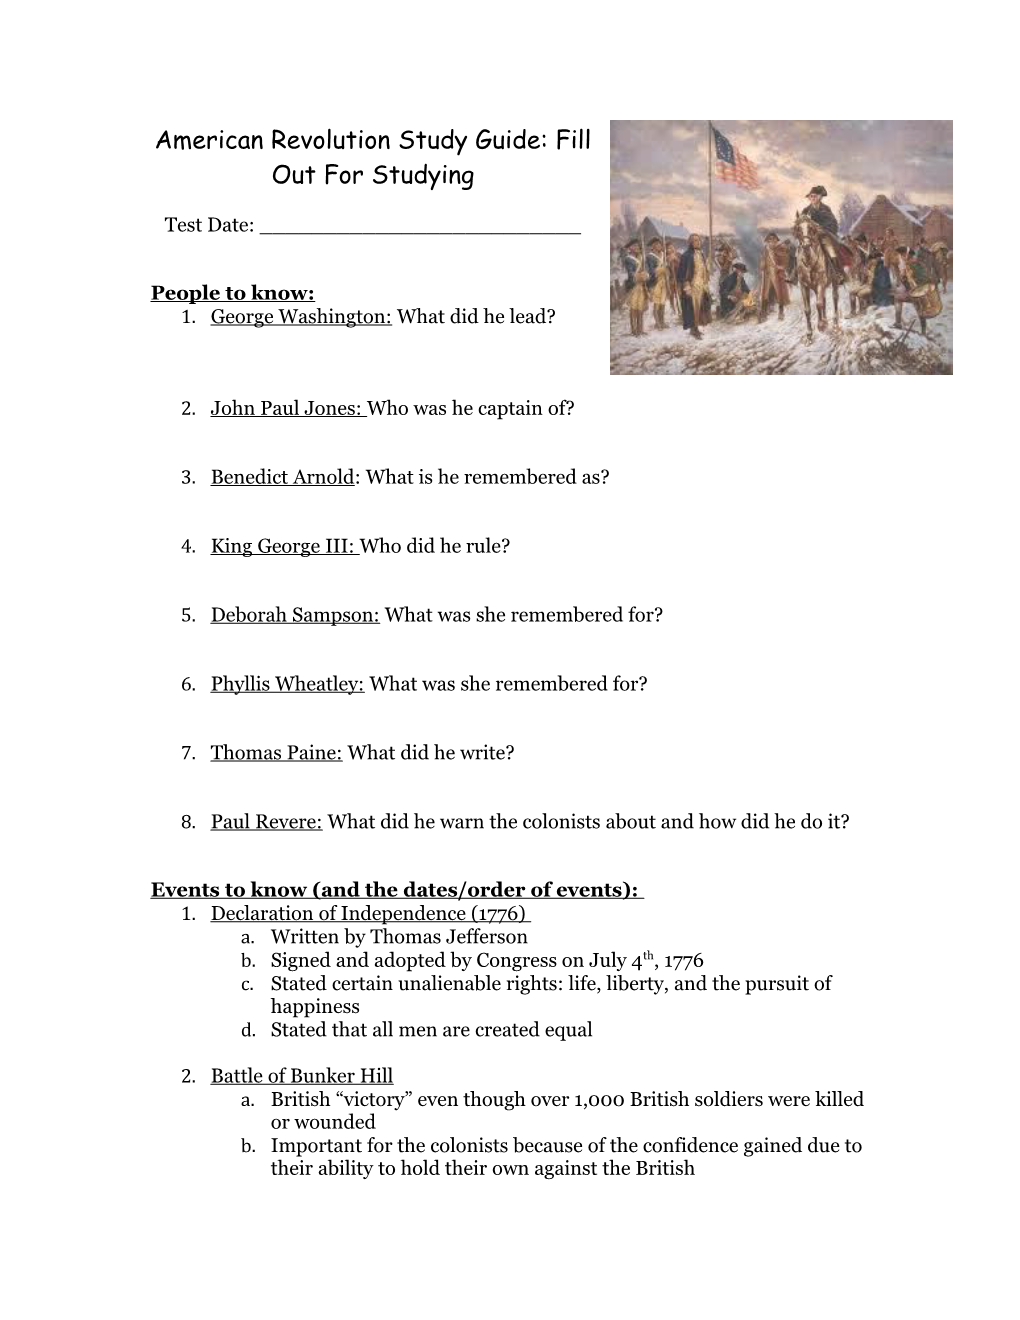 American Revolution Study Guide: Fill out for Studying